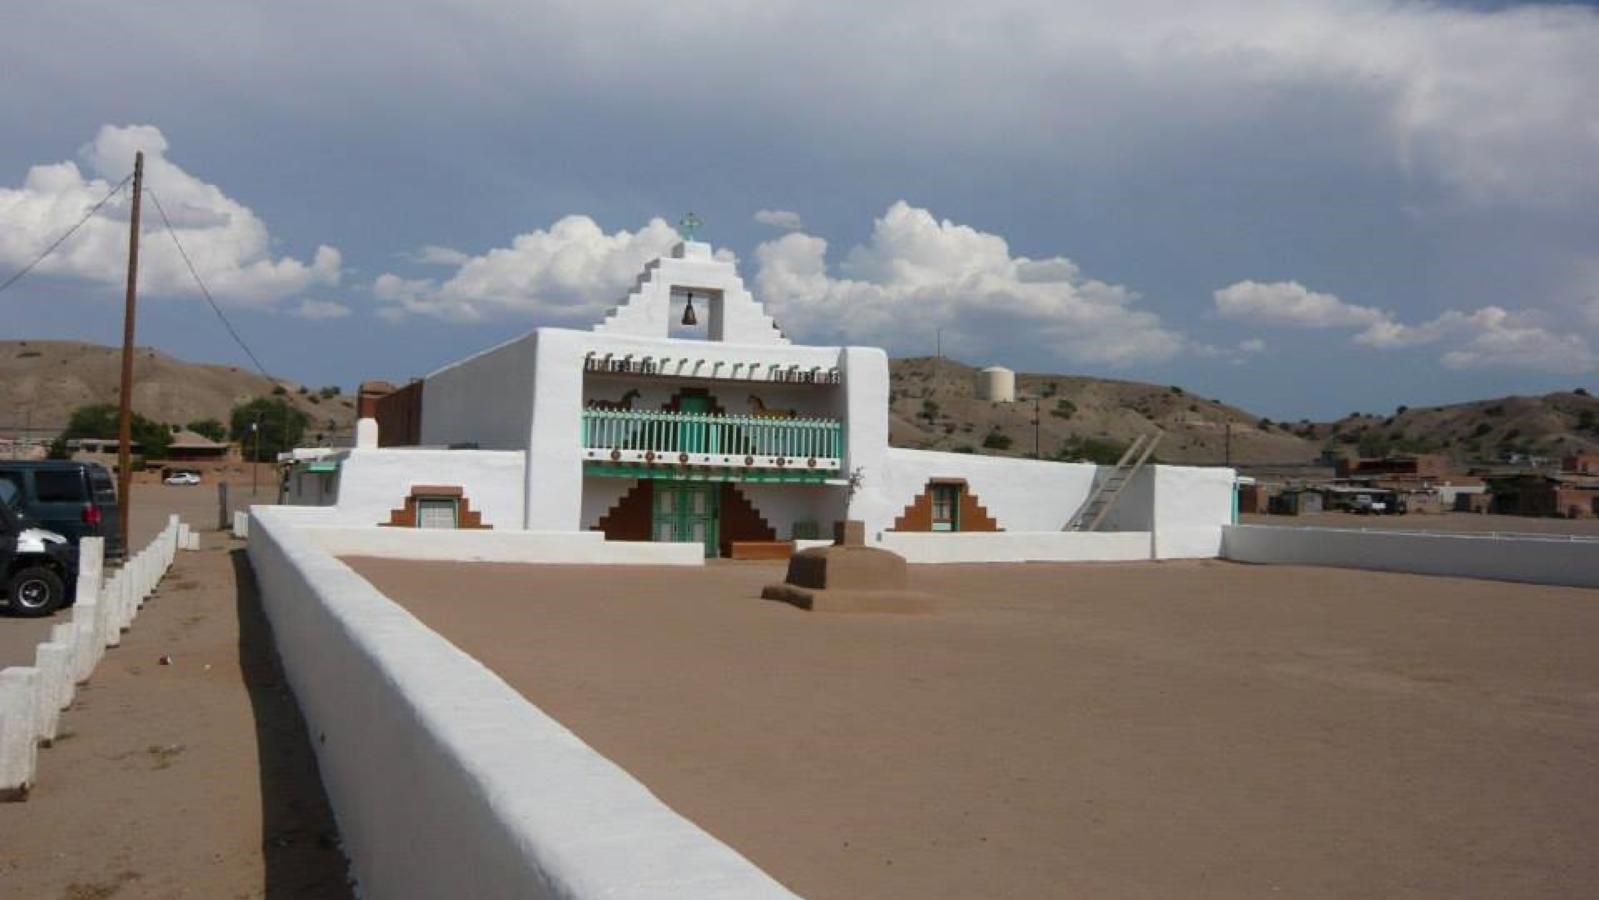 A white stucco building with teal detailing. Out front is a patio area surrounded by a short wall.